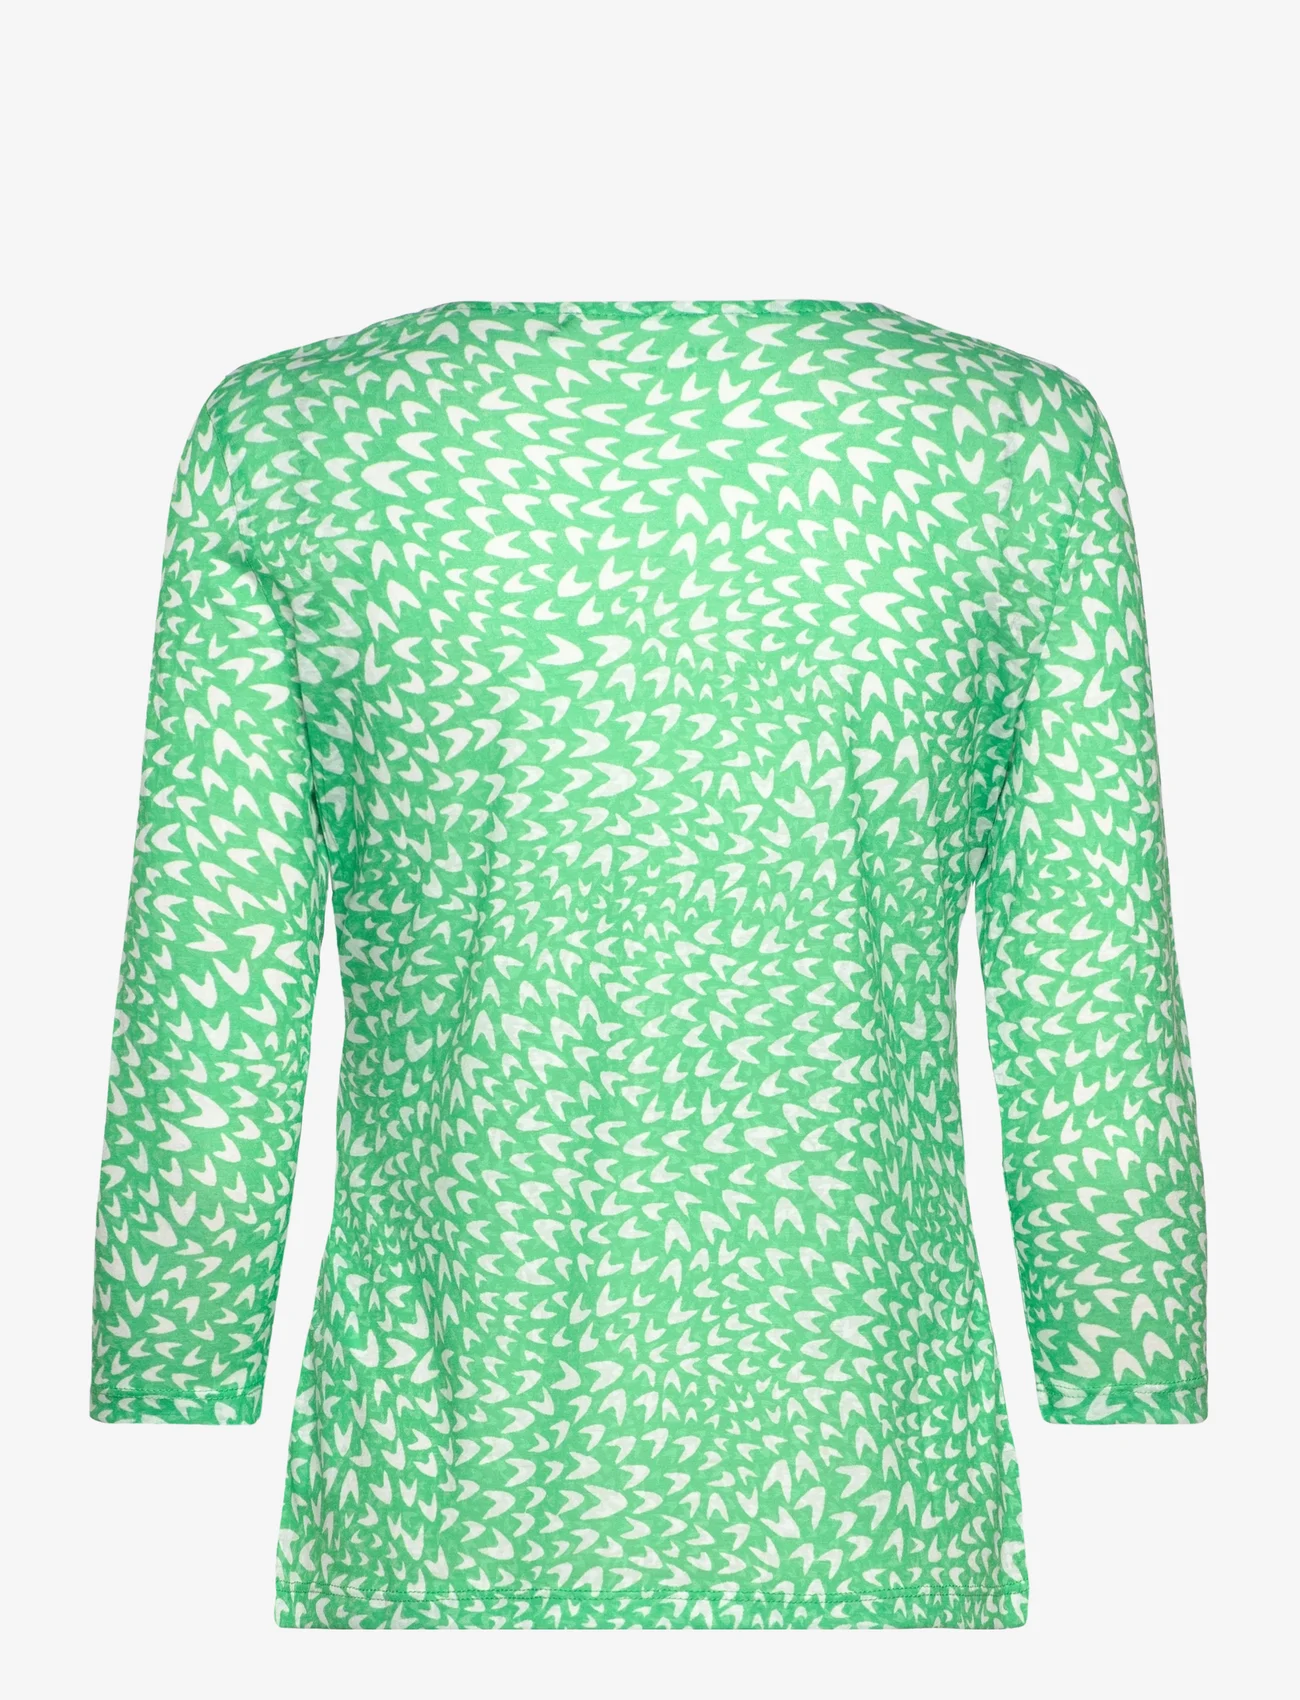 Gerry Weber Edition - T-SHIRT 3/4 SLEEVE - lowest prices - green/ecru/white print - 1